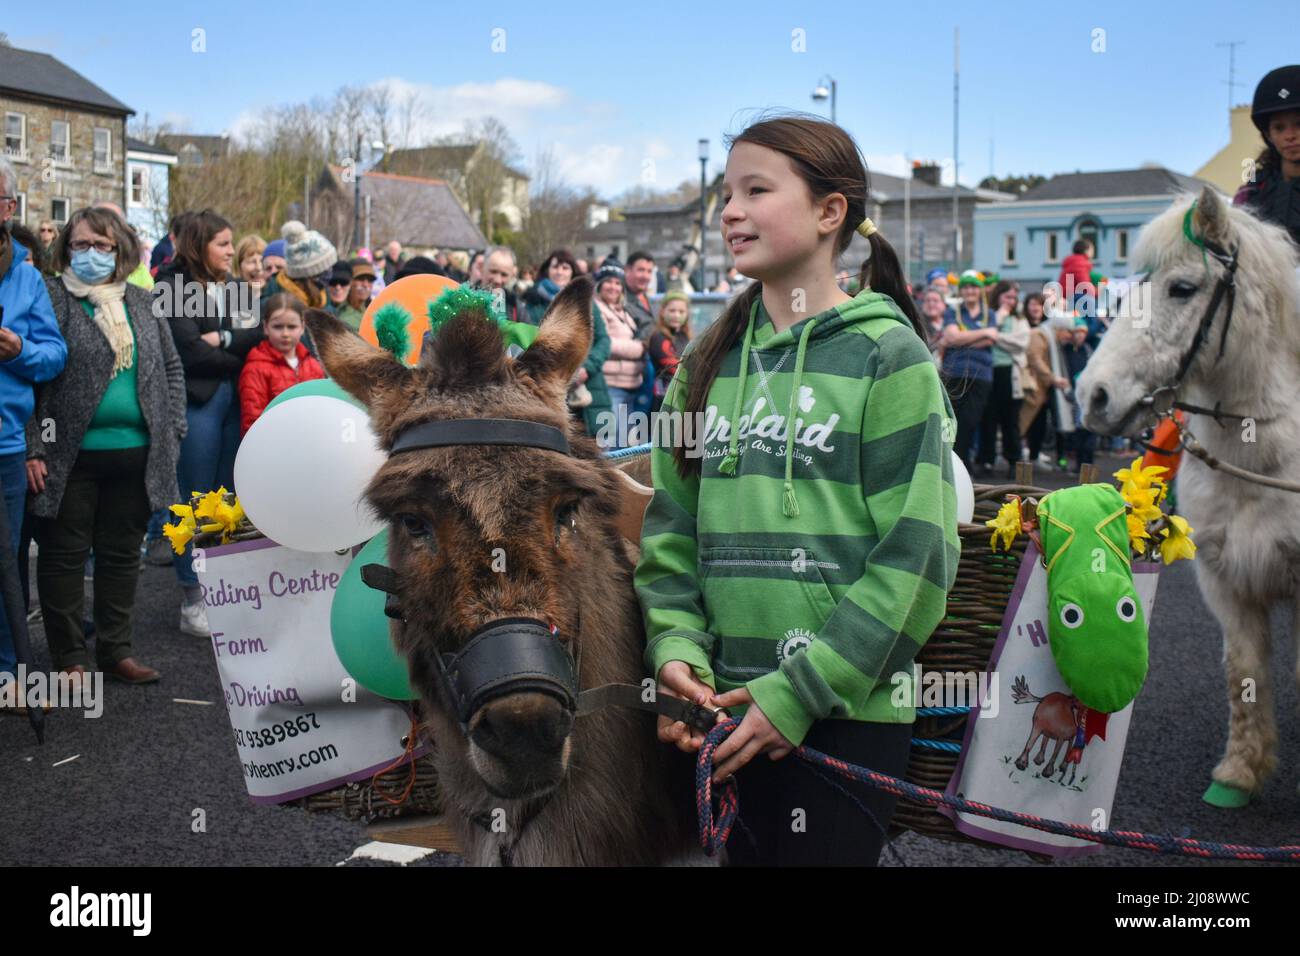 Bantry, West Cork, Ireland. 17th Mar, 2022. After a long break due to the pandemic, Saint Patrick's Day celebrations are back in full swing. A large crowd of people gathered today in the square to watch the parade and enjoy the sunny day. Credit: Karlis Dzjamko/Alamy Live News Stock Photo